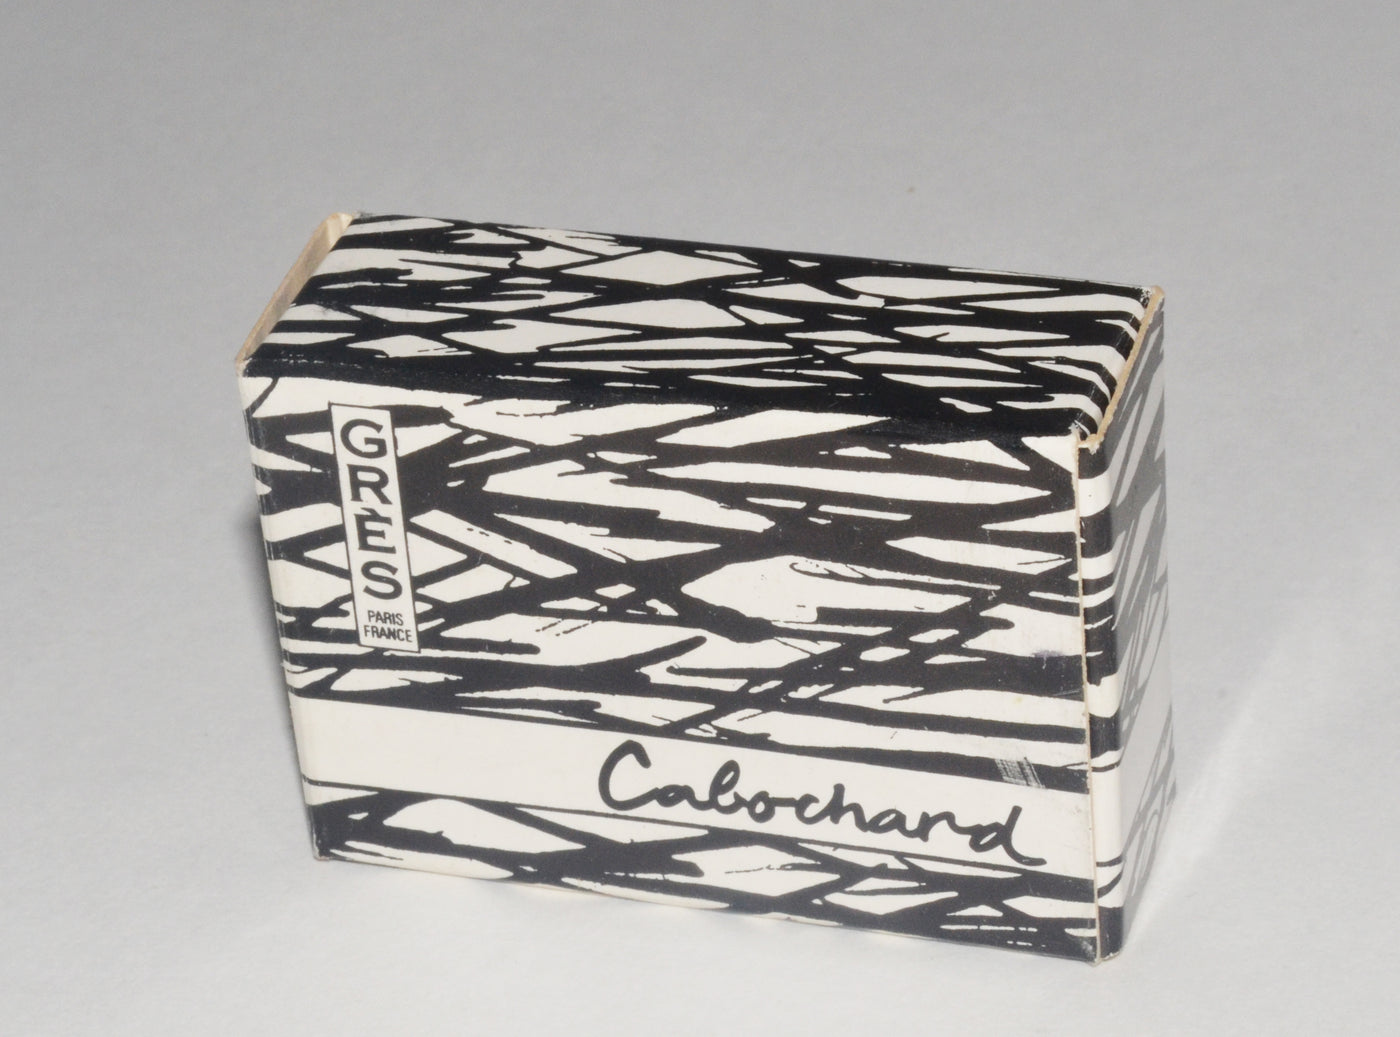 Cabochard Soap By Gres